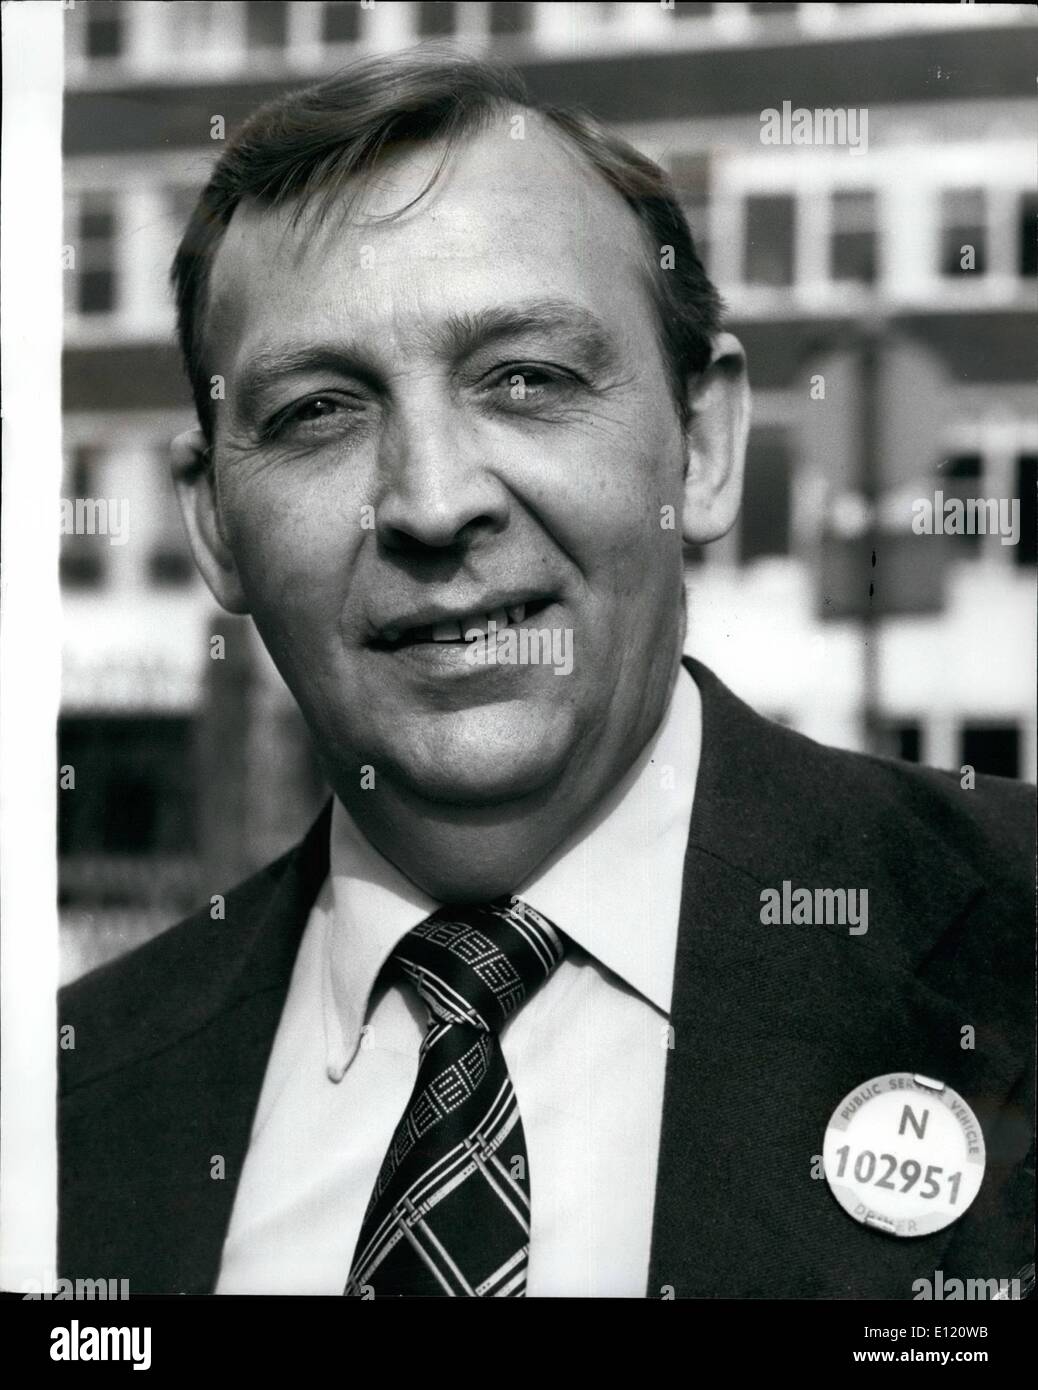 Jun. 06, 1981 - Bus driver - Conservative Candidate for Warrington: Photo shows Stan Sorrell, the Tory Party Candidate for the Warrington by-election-pictured at his Finchley Bus Garage today. Stock Photo